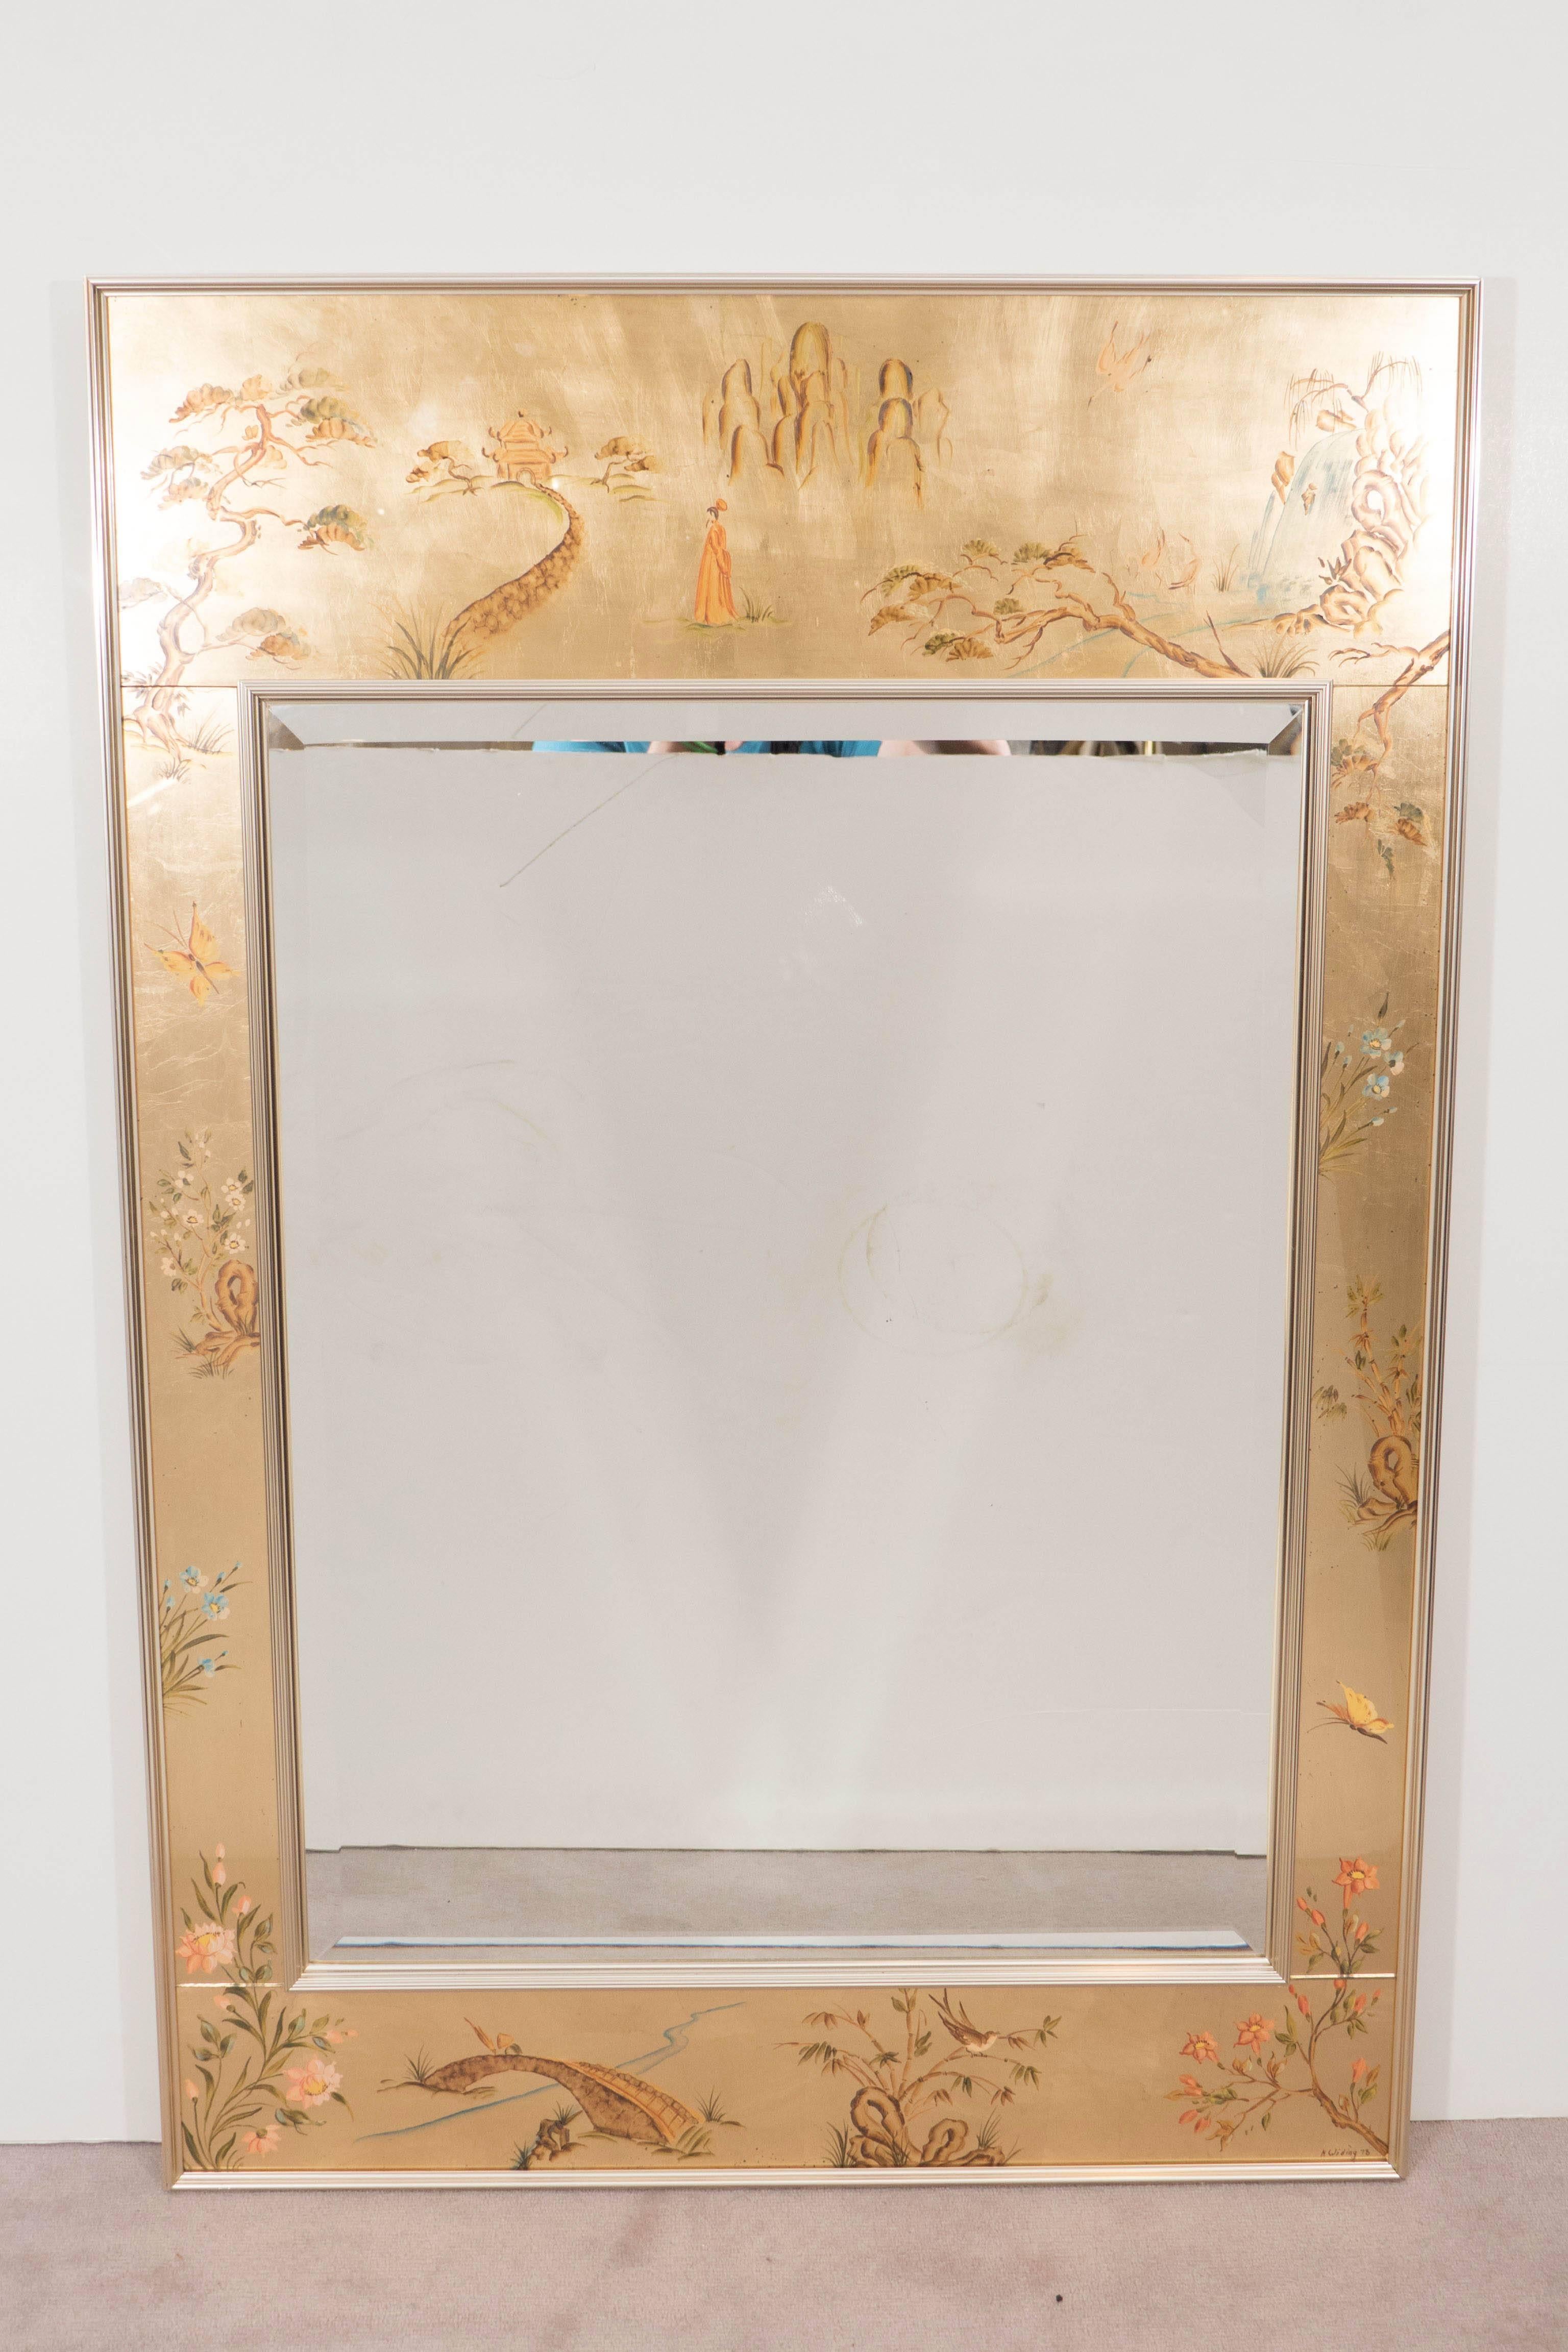 A vintage chinoiserie style wall mirror, produced by Labarge, circa 1970s, inset within a reverse hand-painted églomisé frame, decorated with birds, butterflies and varied floral designs, as well as Asian motifs and architectural elements,